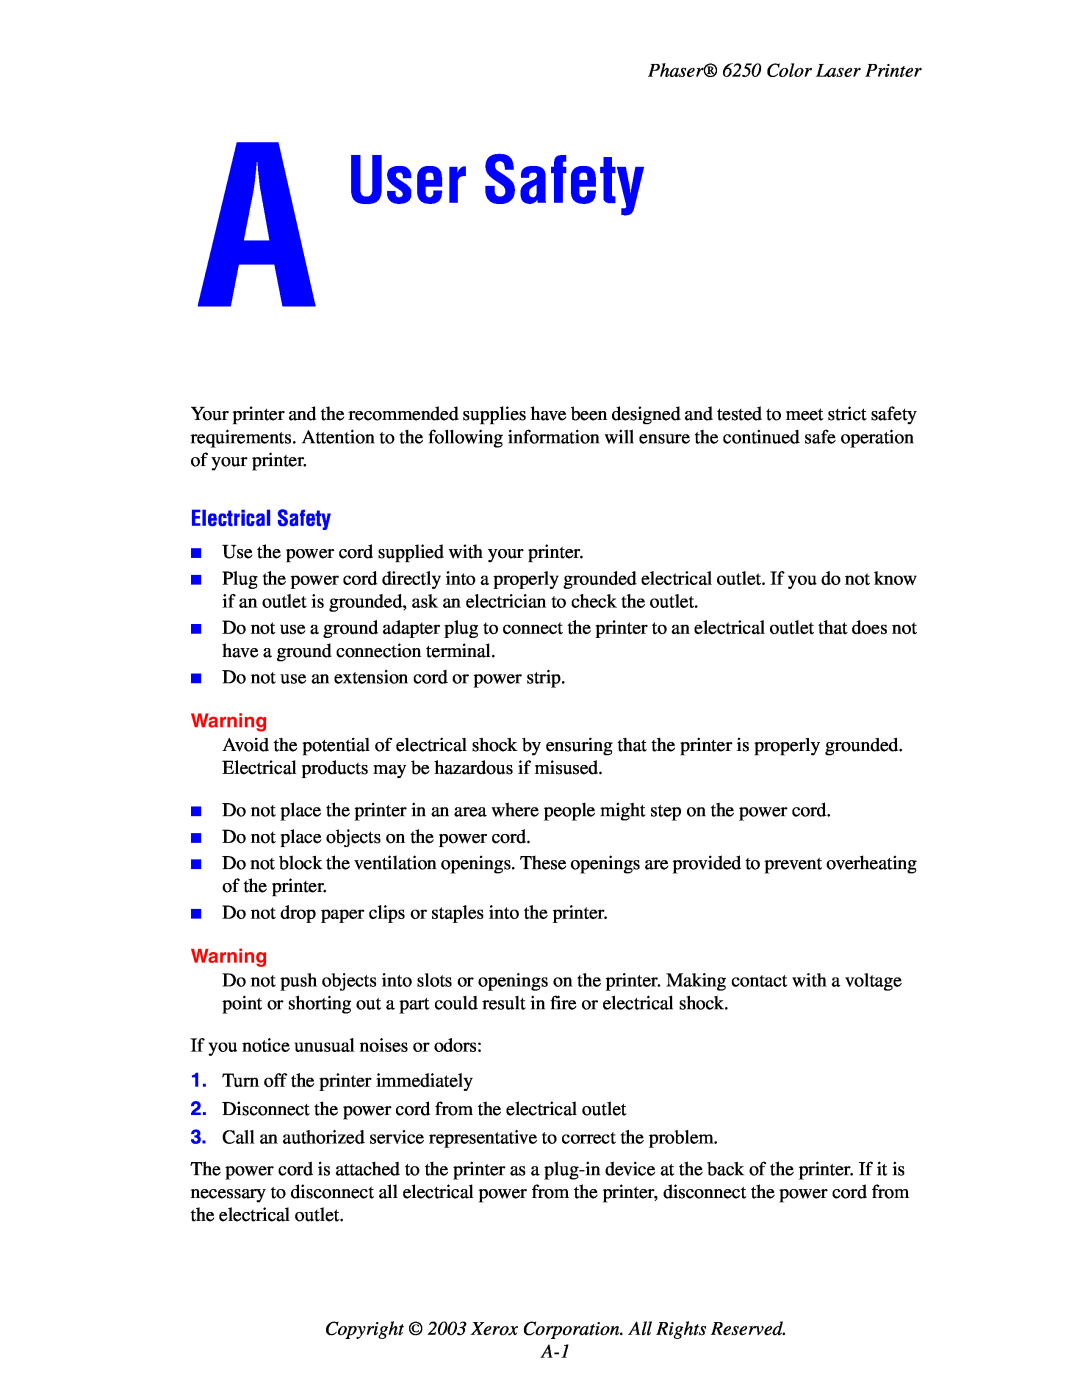 Xerox 6250 manual User Safety, Electrical Safety, Copyright 2003 Xerox Corporation. All Rights Reserved A-1 